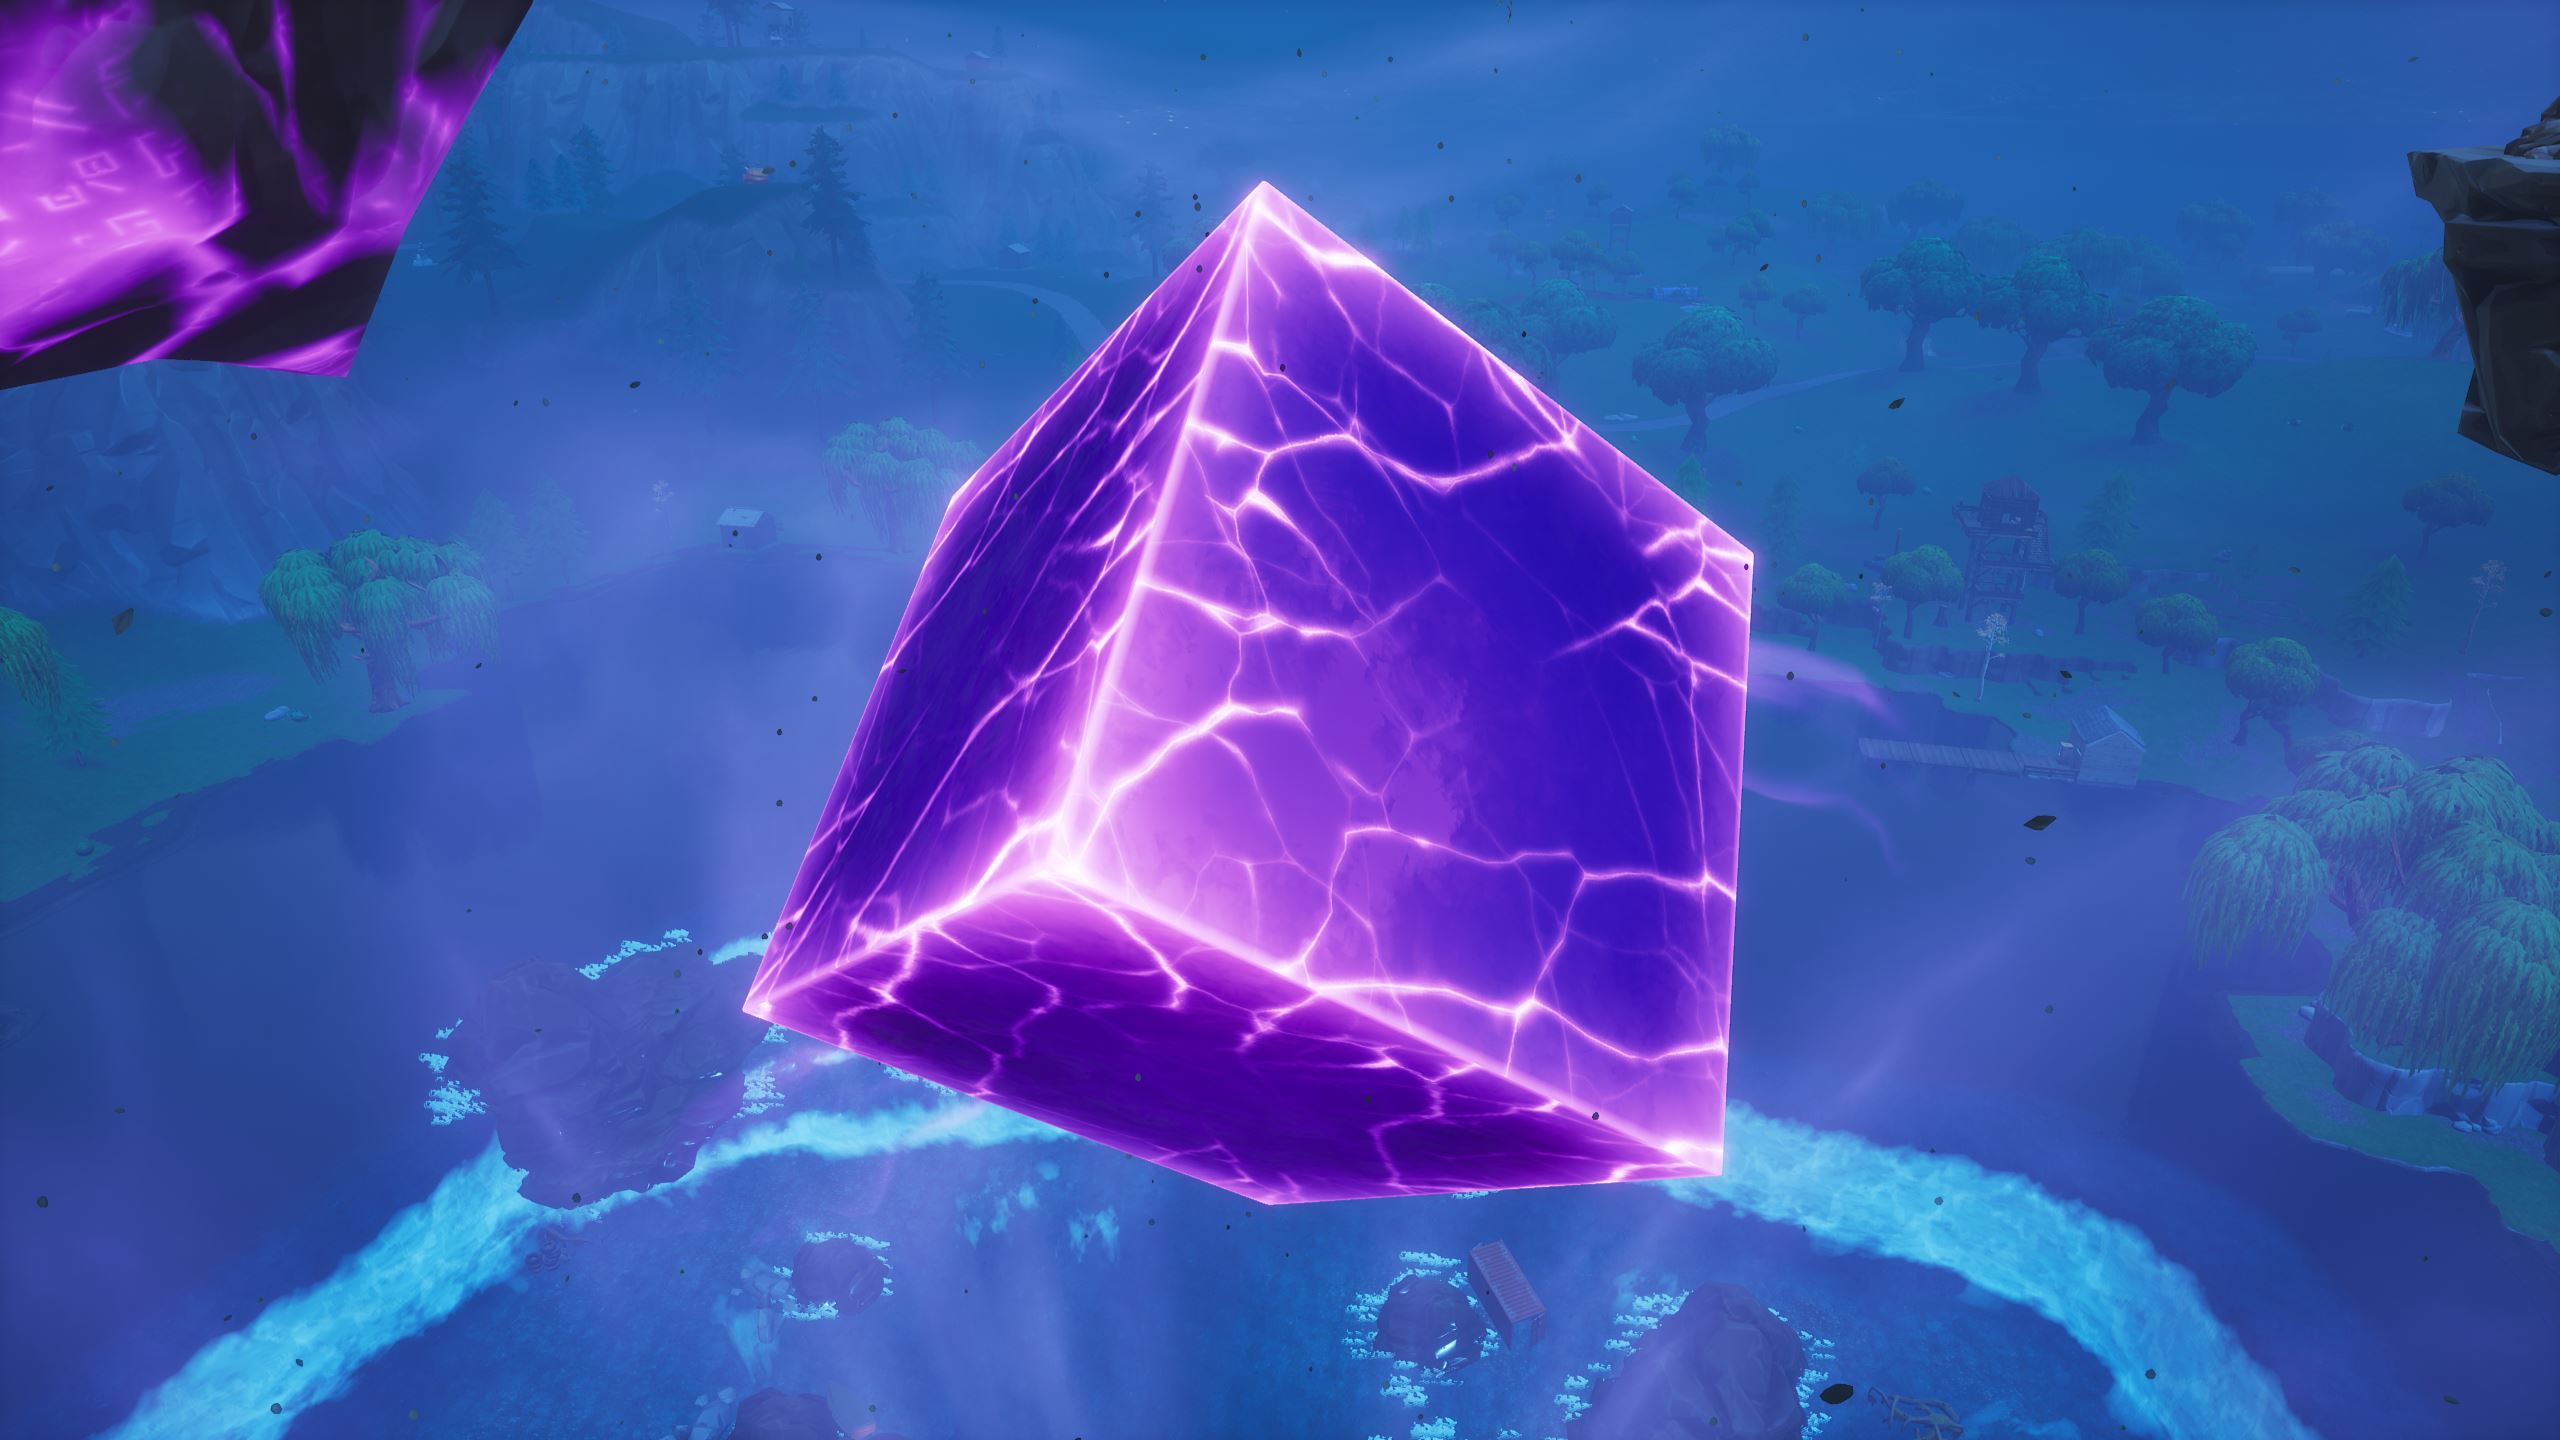 Fortnite S Next Big In Game Event Announced Pray For Cube Death